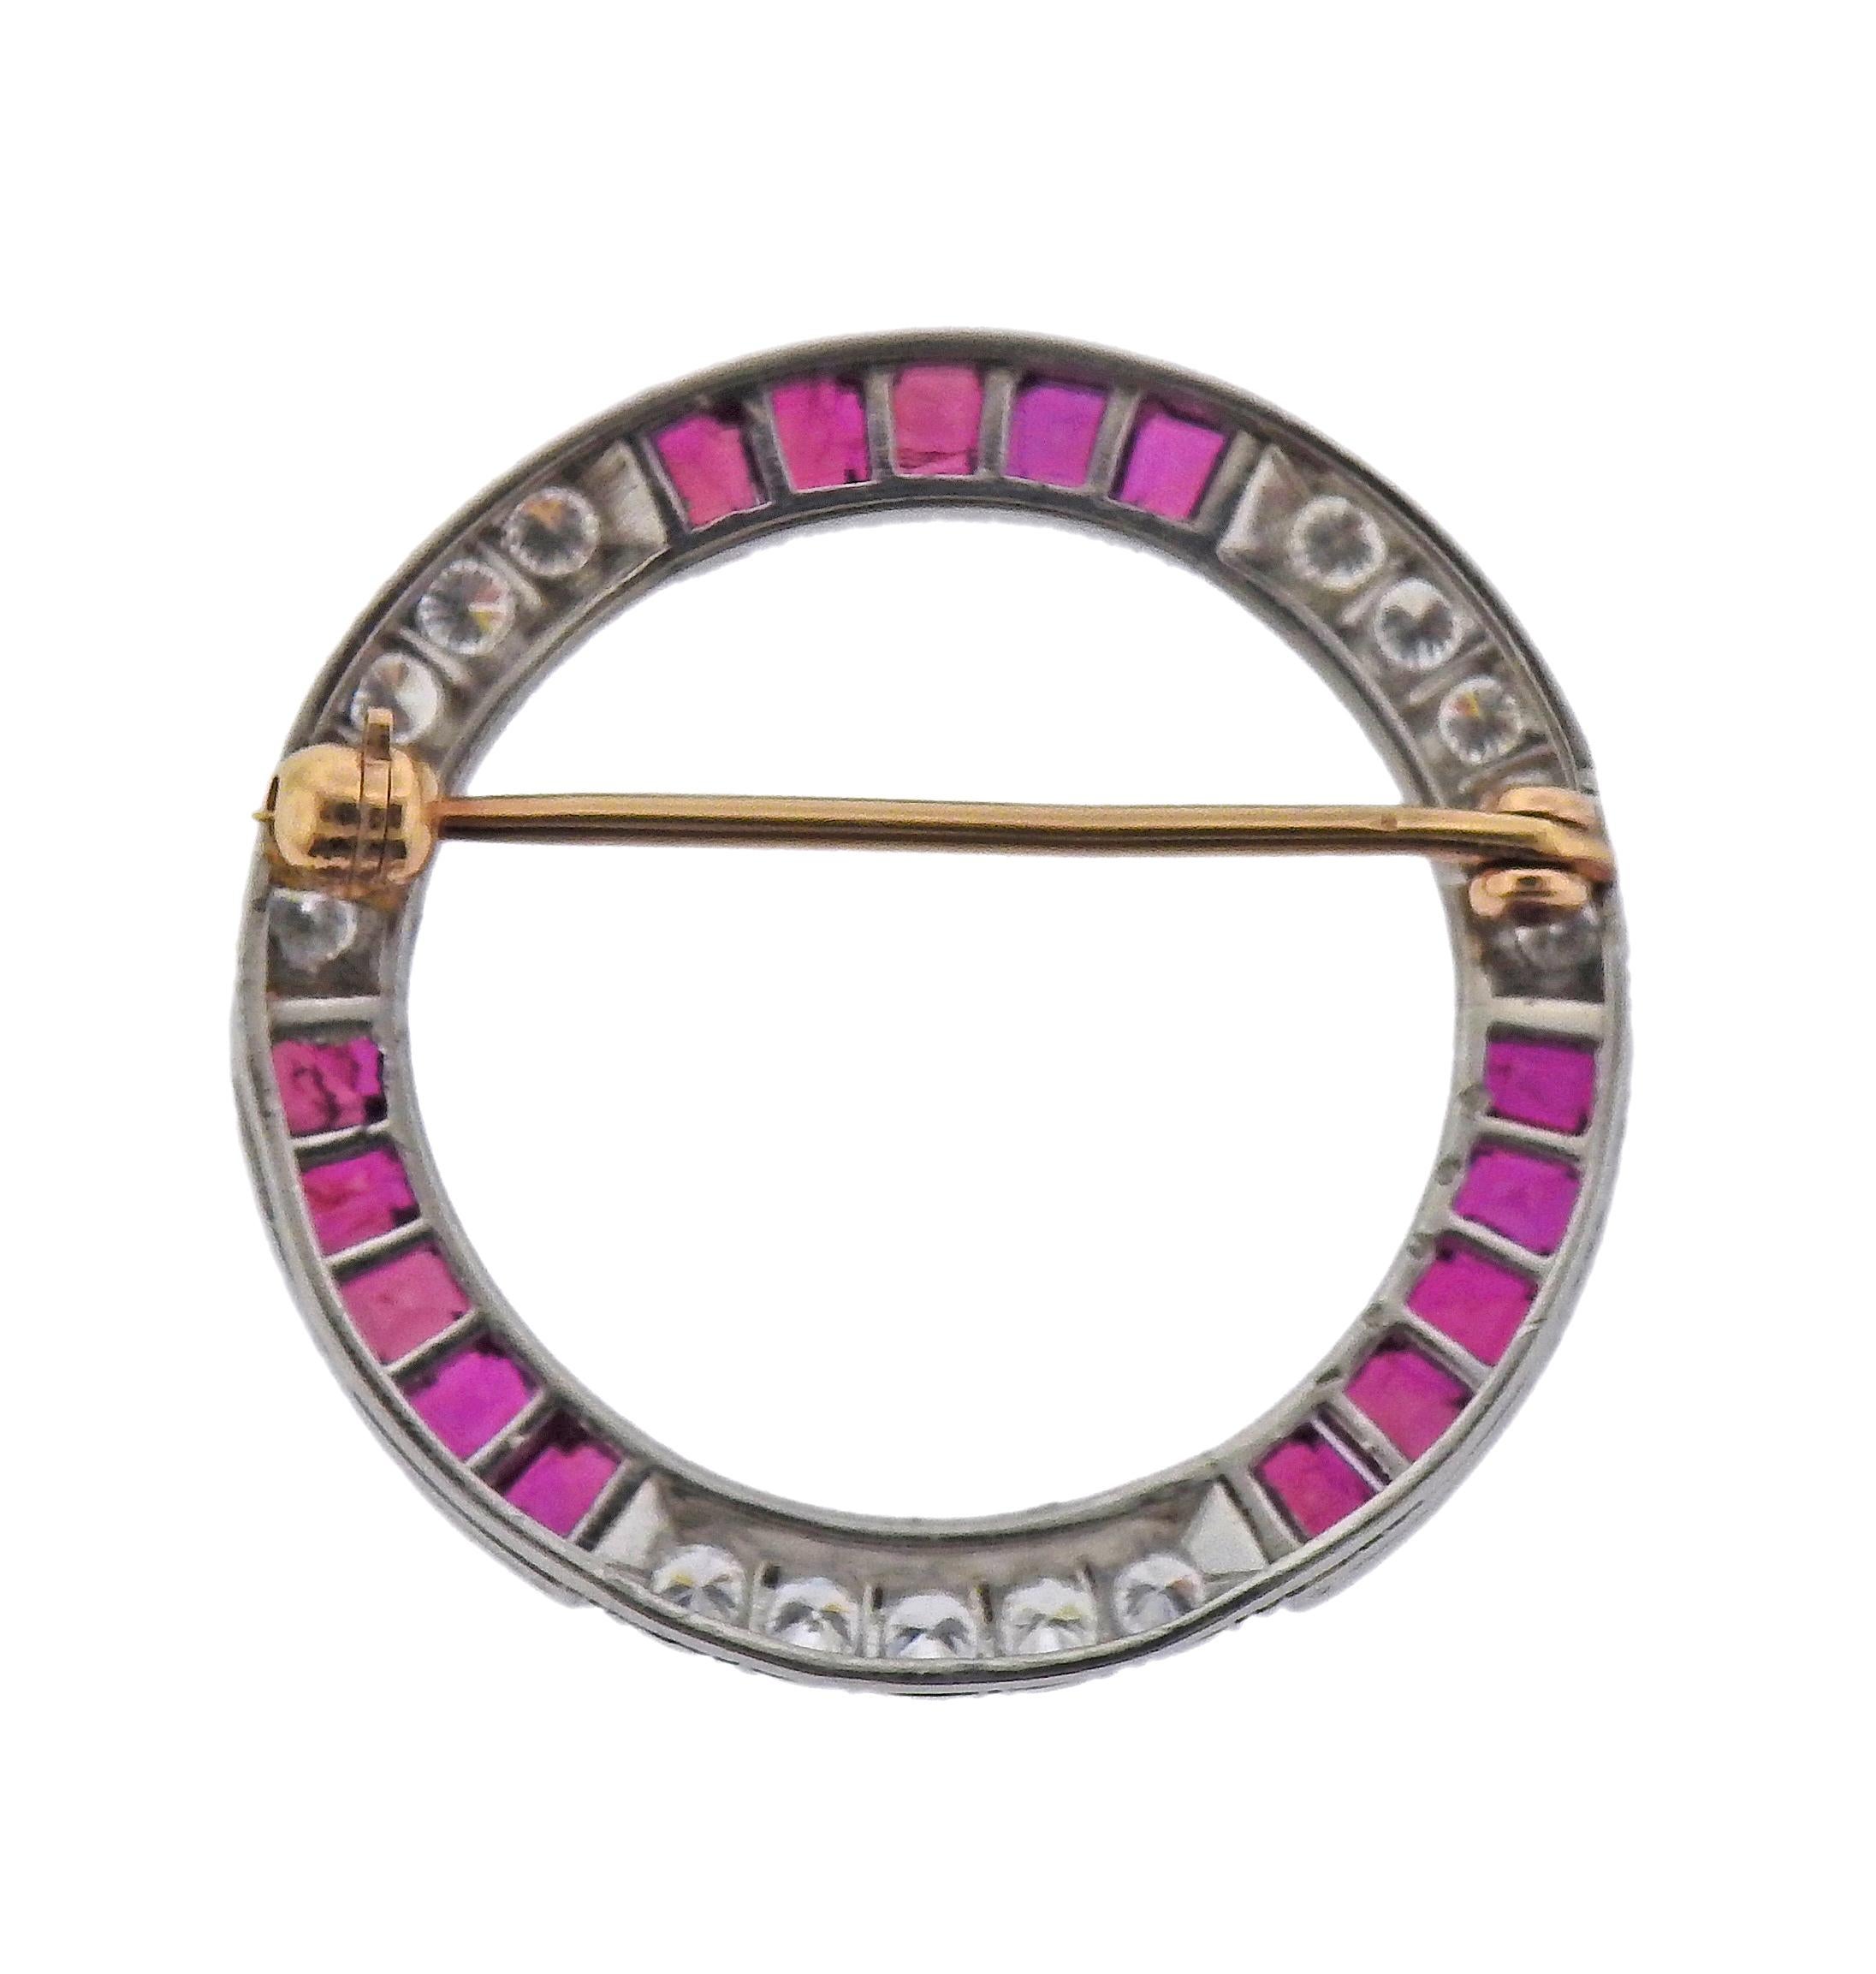 Oscar Heyman circle brooch in platinum with 18k gold hardware. Adorned with square cut rubies and approx. 0.60ctw in diamonds. Brooch is 1 1/16